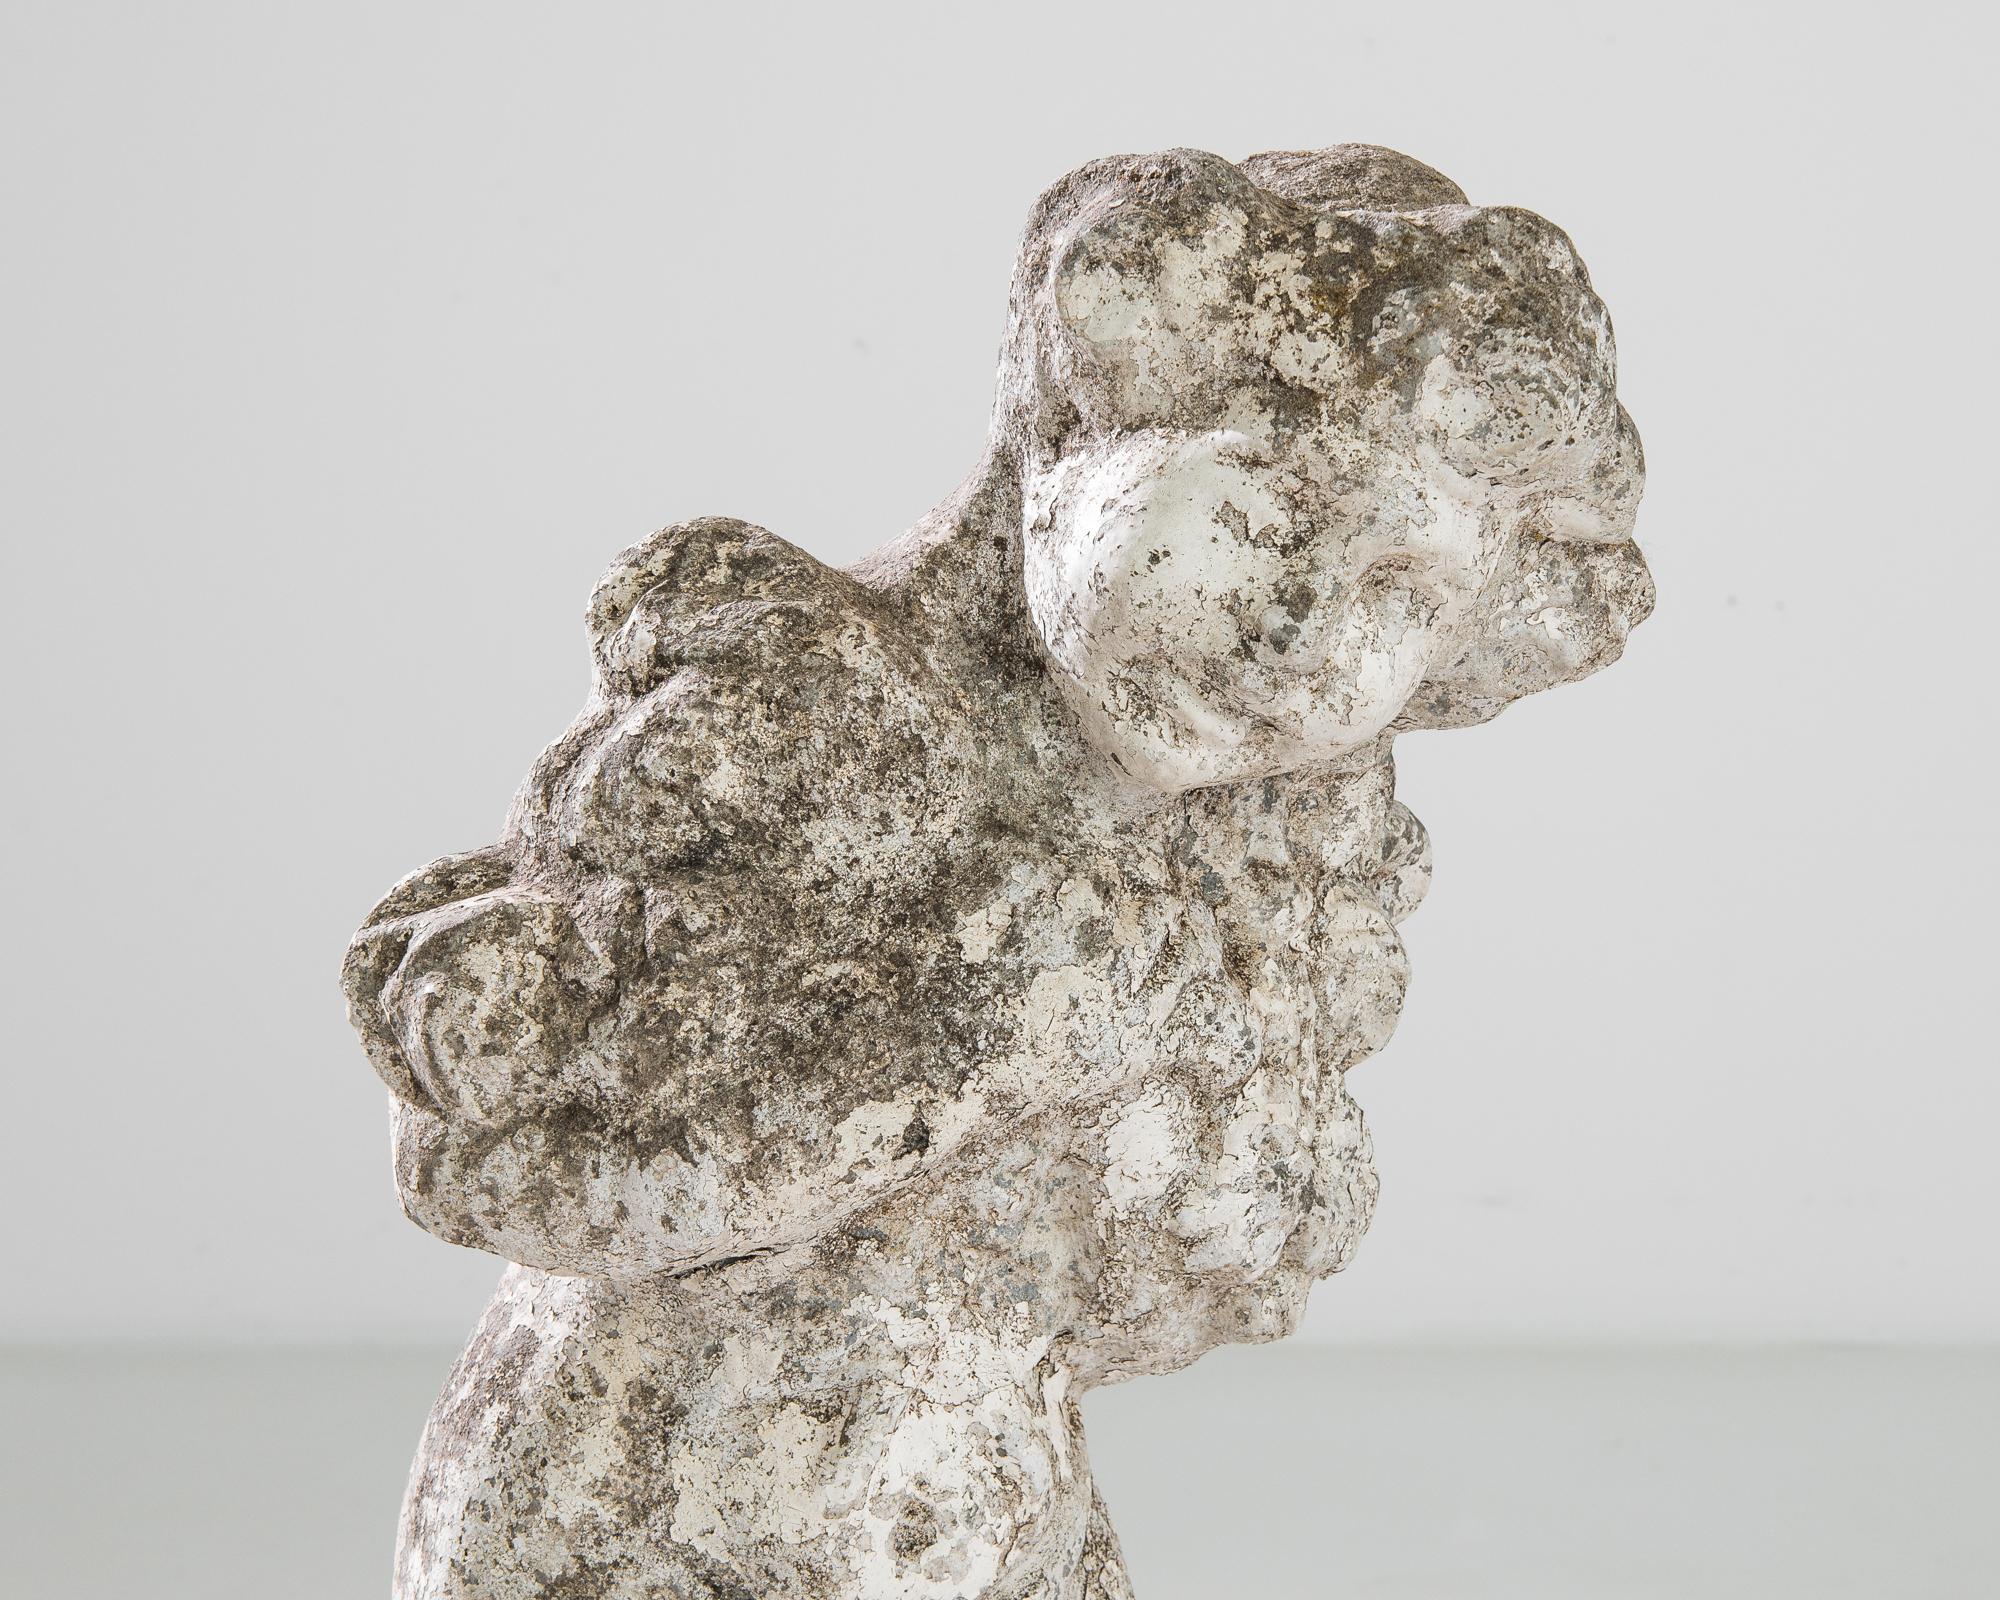 A concrete statue from 1950s France, depicting a cherub holding a garland of flowers. An aged patina dapples the surface of the concrete, inflecting the original white painted finish with notes of lichen and stone. The graceful pose and soft outline